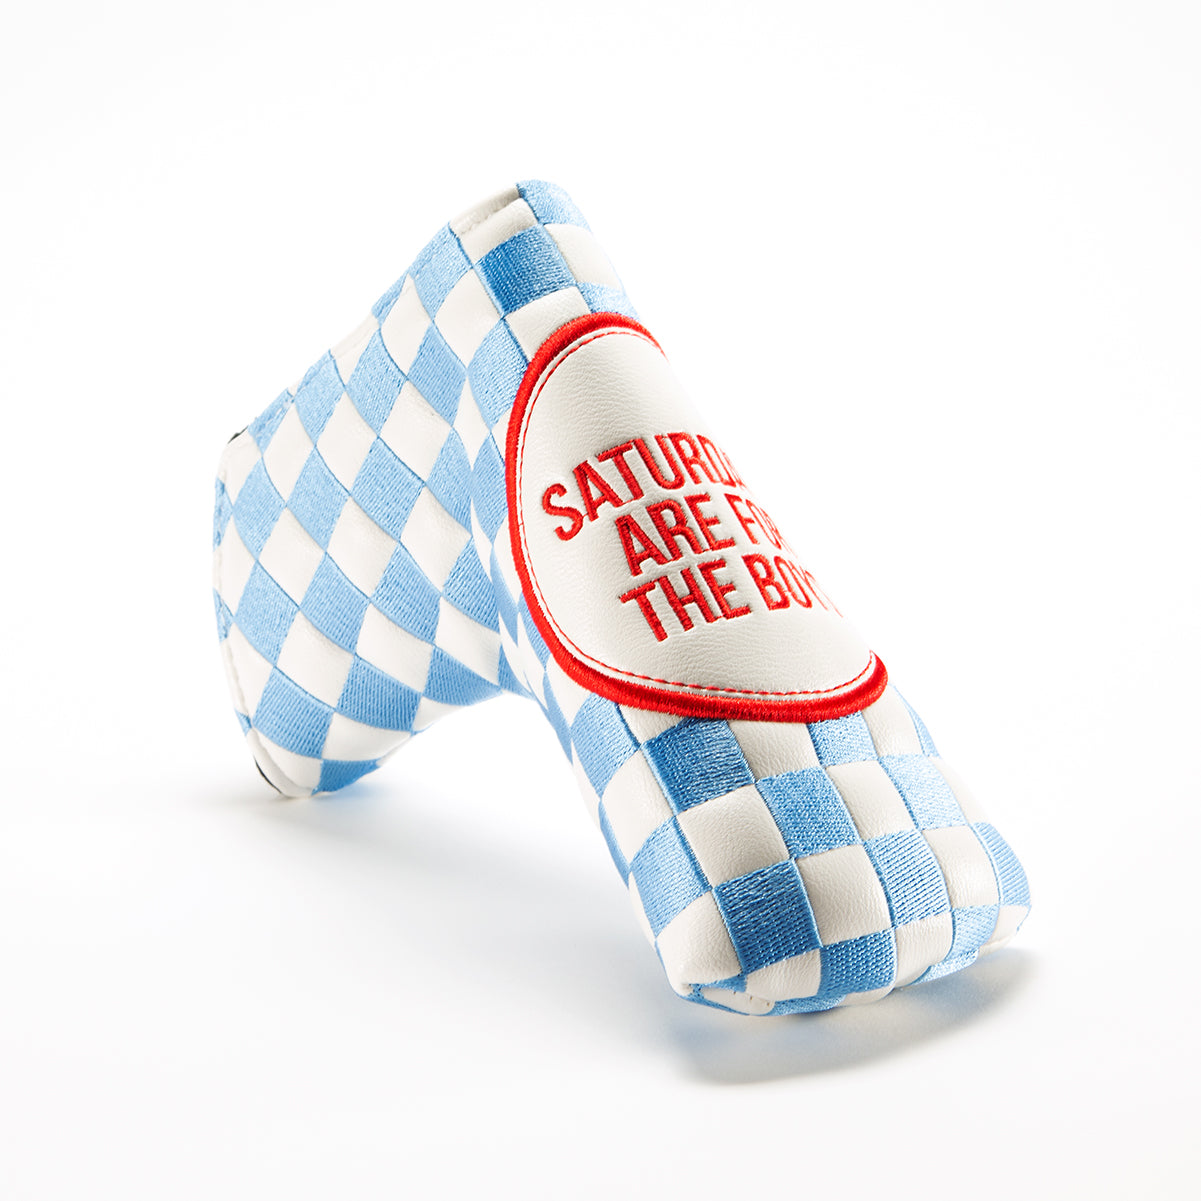 SAFTB Checkered Blade Putter Cover-Golf Accessories-Fore Play-Light Blue-One Size-Barstool Sports